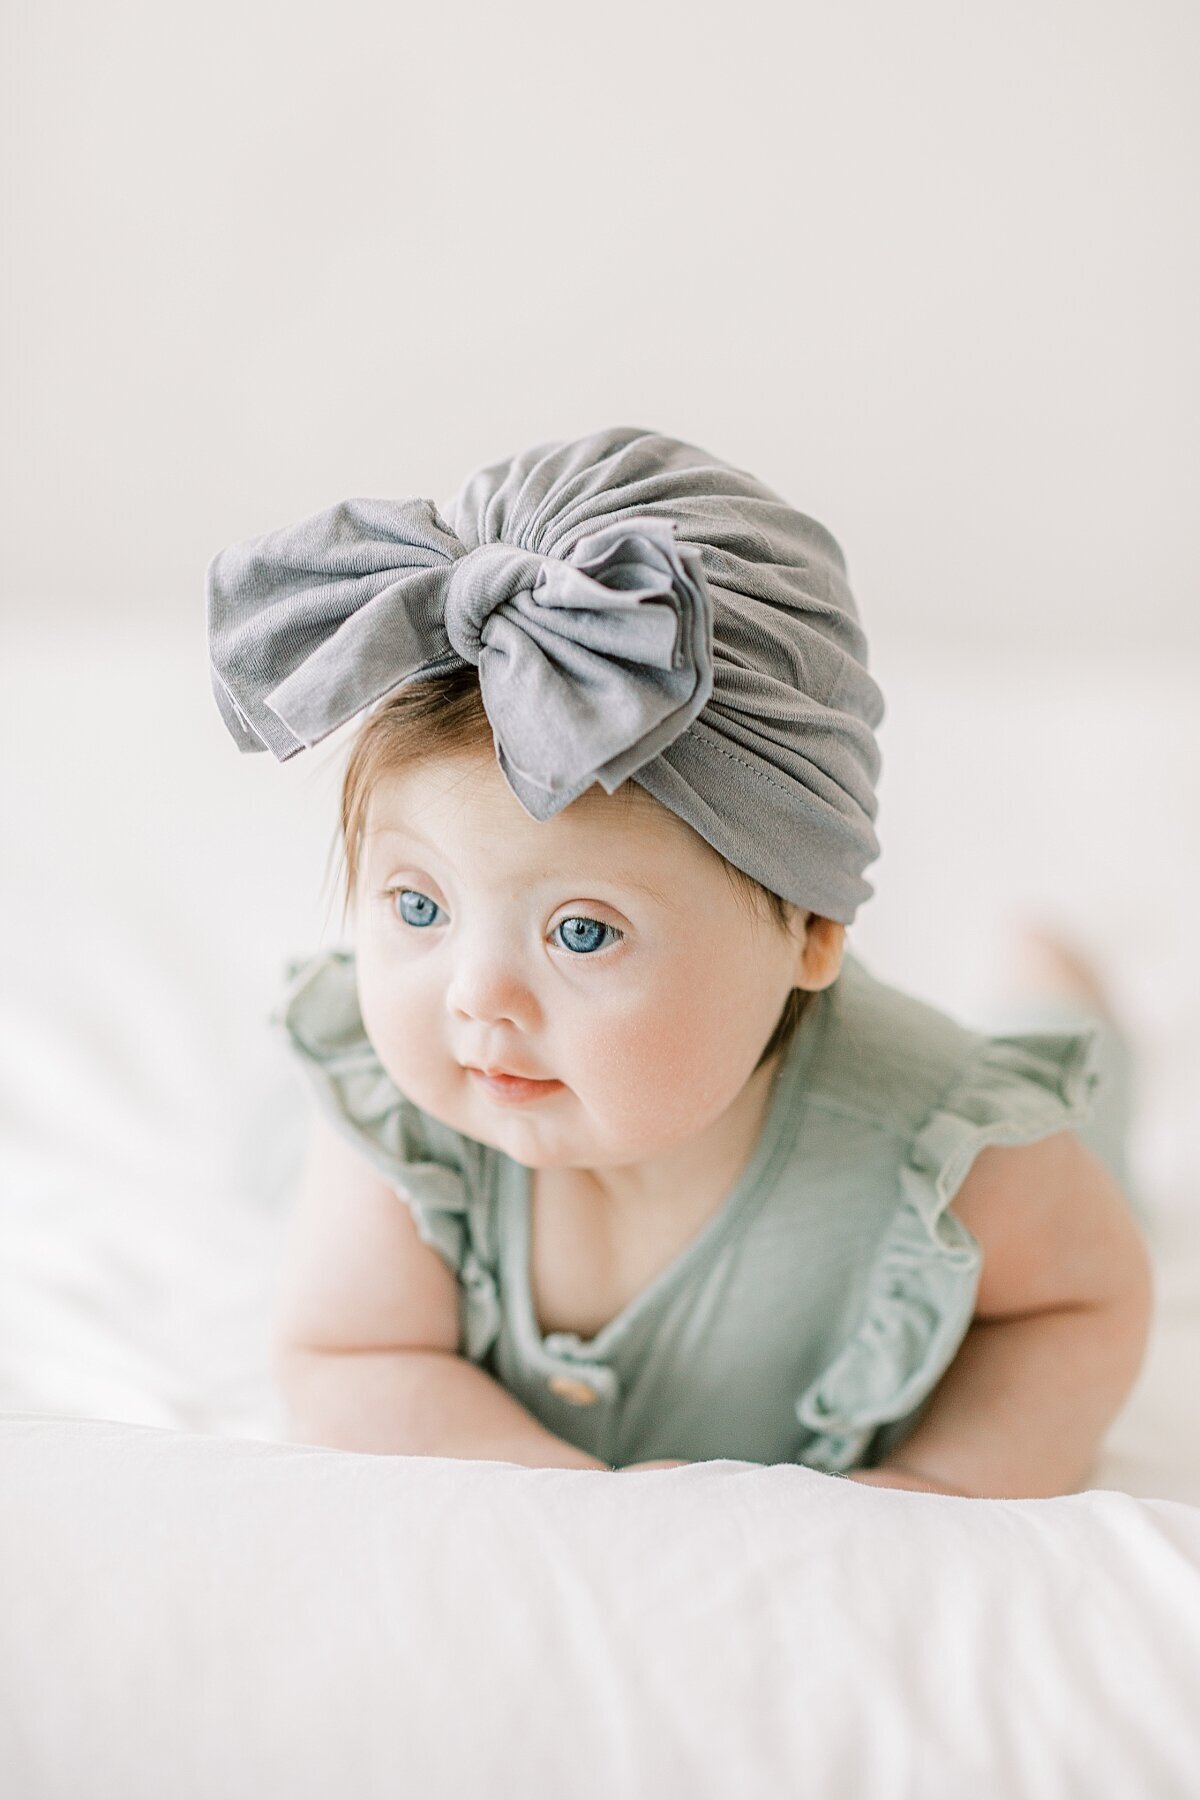 adorable baby girl with down syndrome